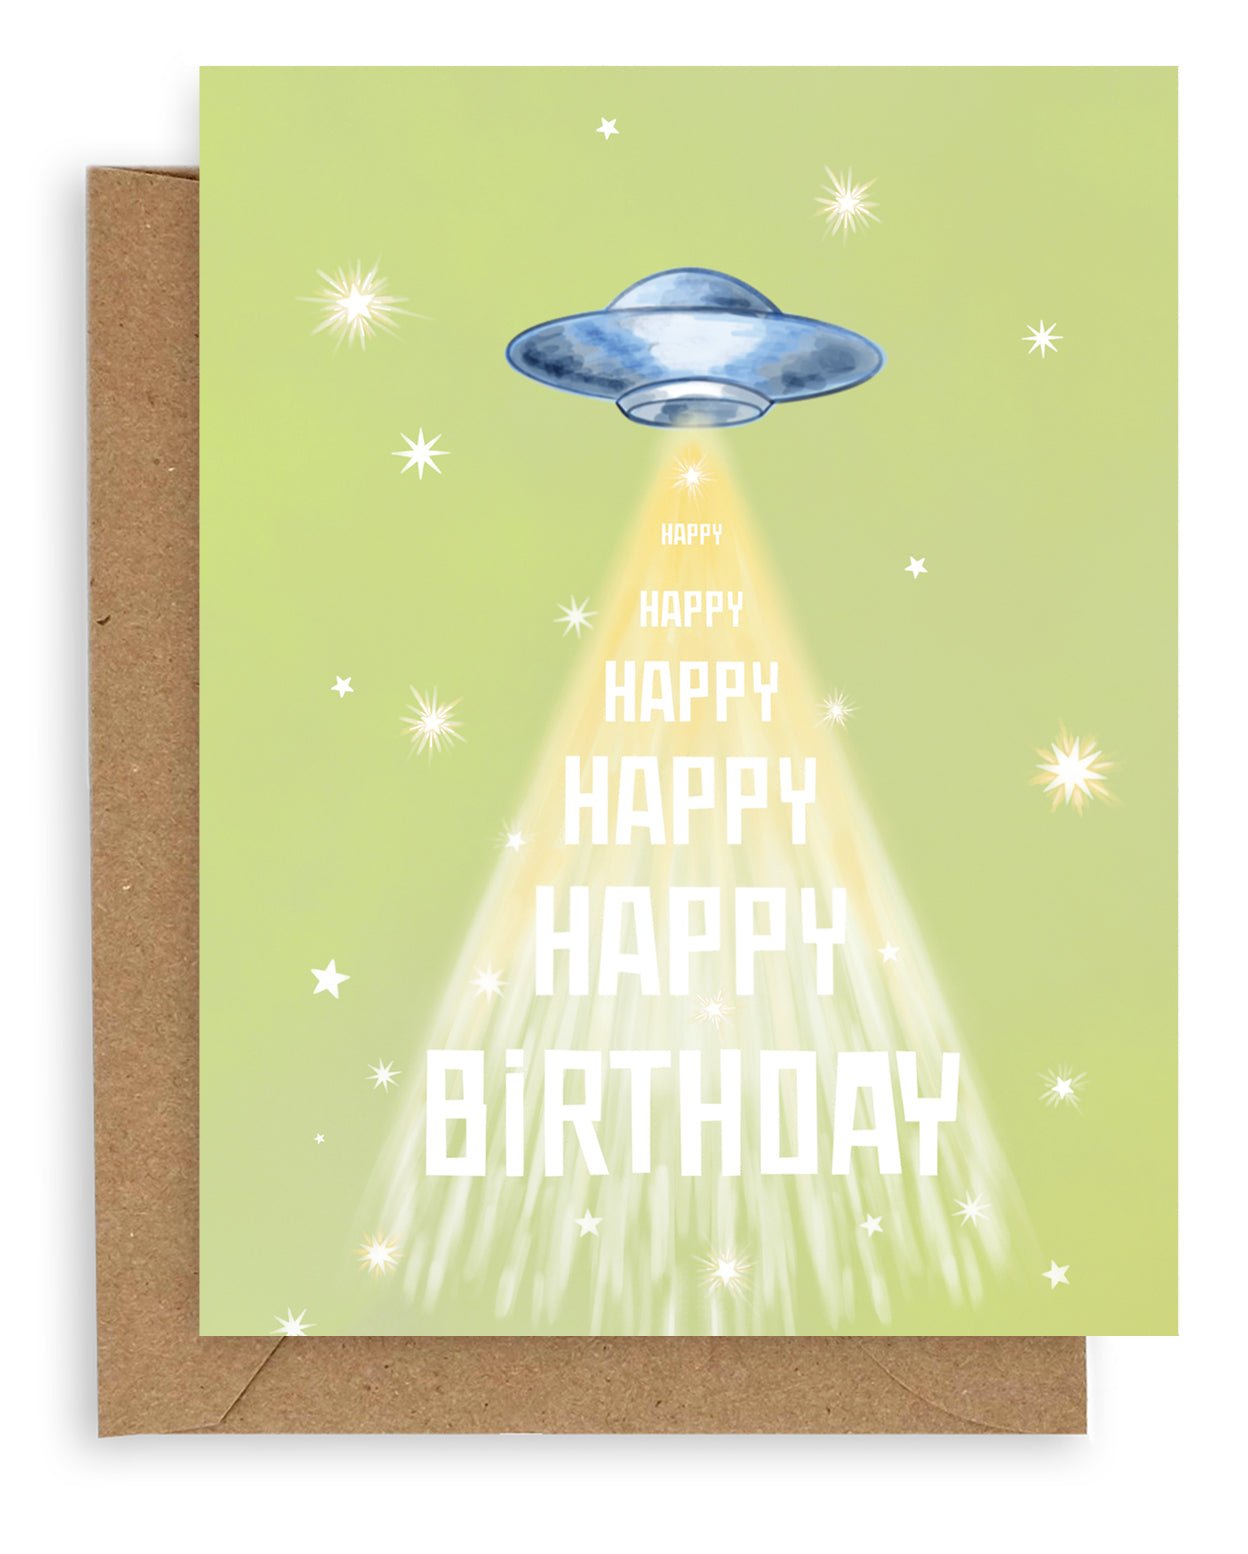 Greeting card with green background featuring stars and flying saucer with &quot;happy birthday&quot; printed down the front. Shown with kraft envelope.